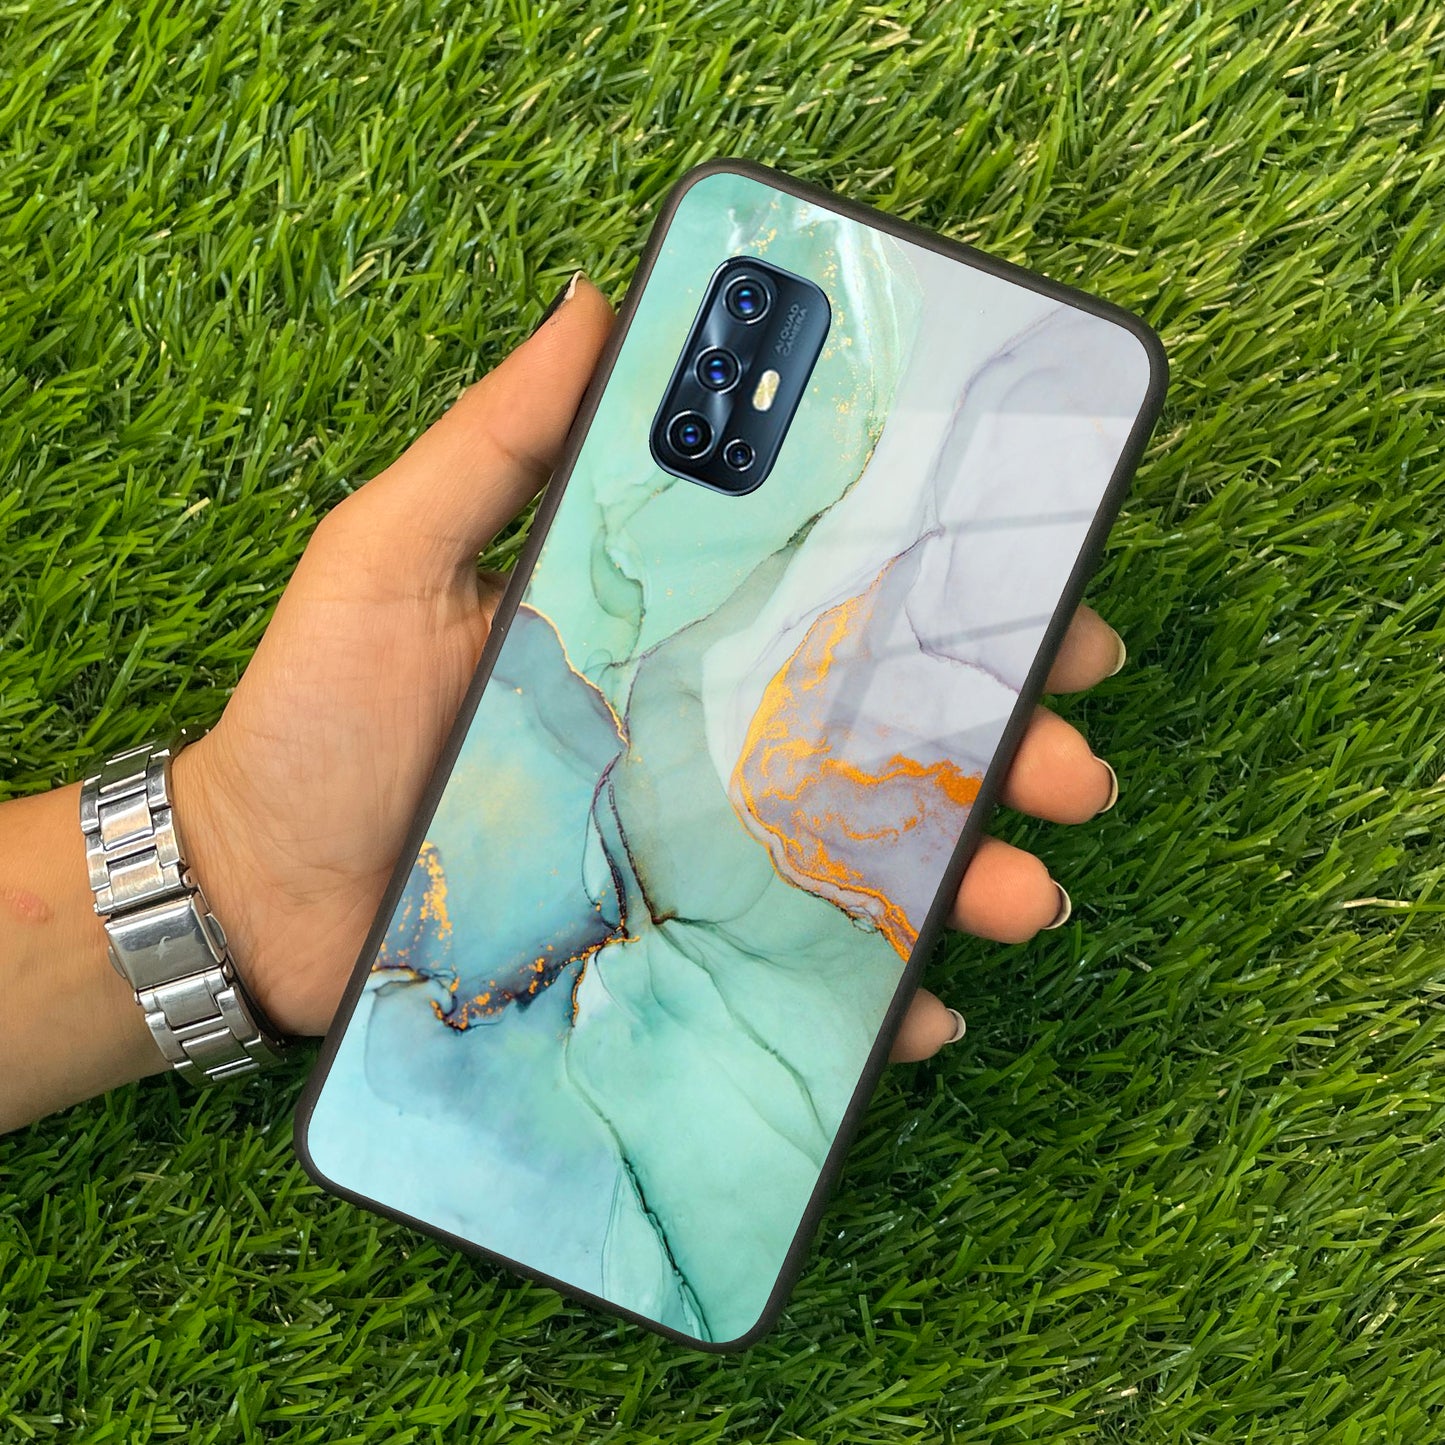 Marble Glass Finish Phone Case And Cover For Vivo